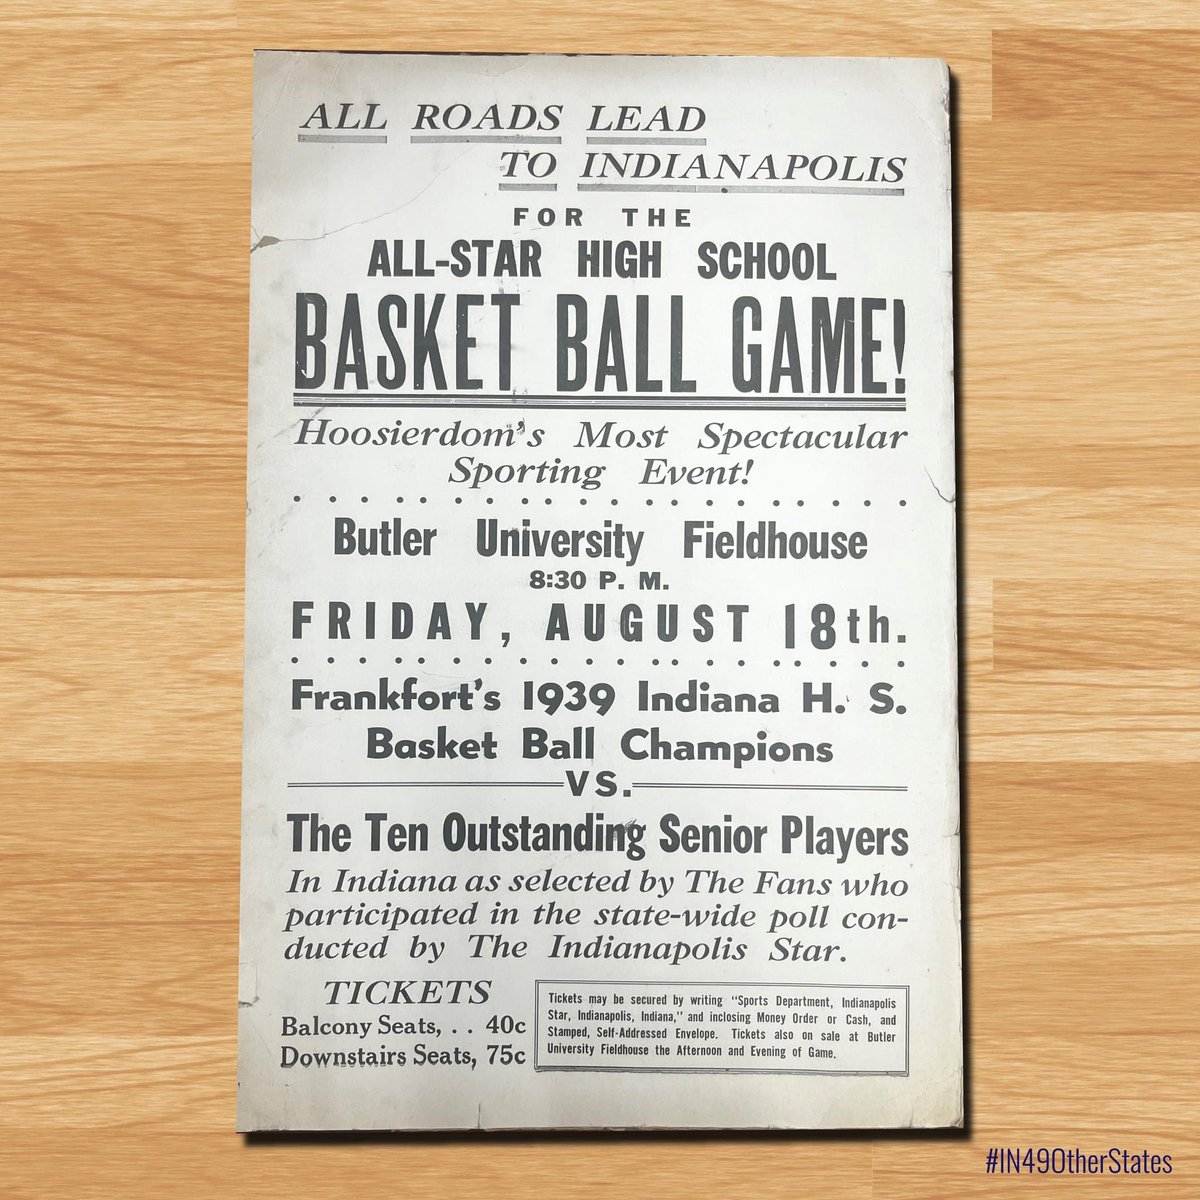 #ThrowbackThursday | Today, the 2024 Boys' Indiana All-Star team was announced, and now the rosters are set for both the boys' and girls' All-Star teams! In honor of that we thought we would share this special piece of #HoosierHysteria from our collection! This original poster…